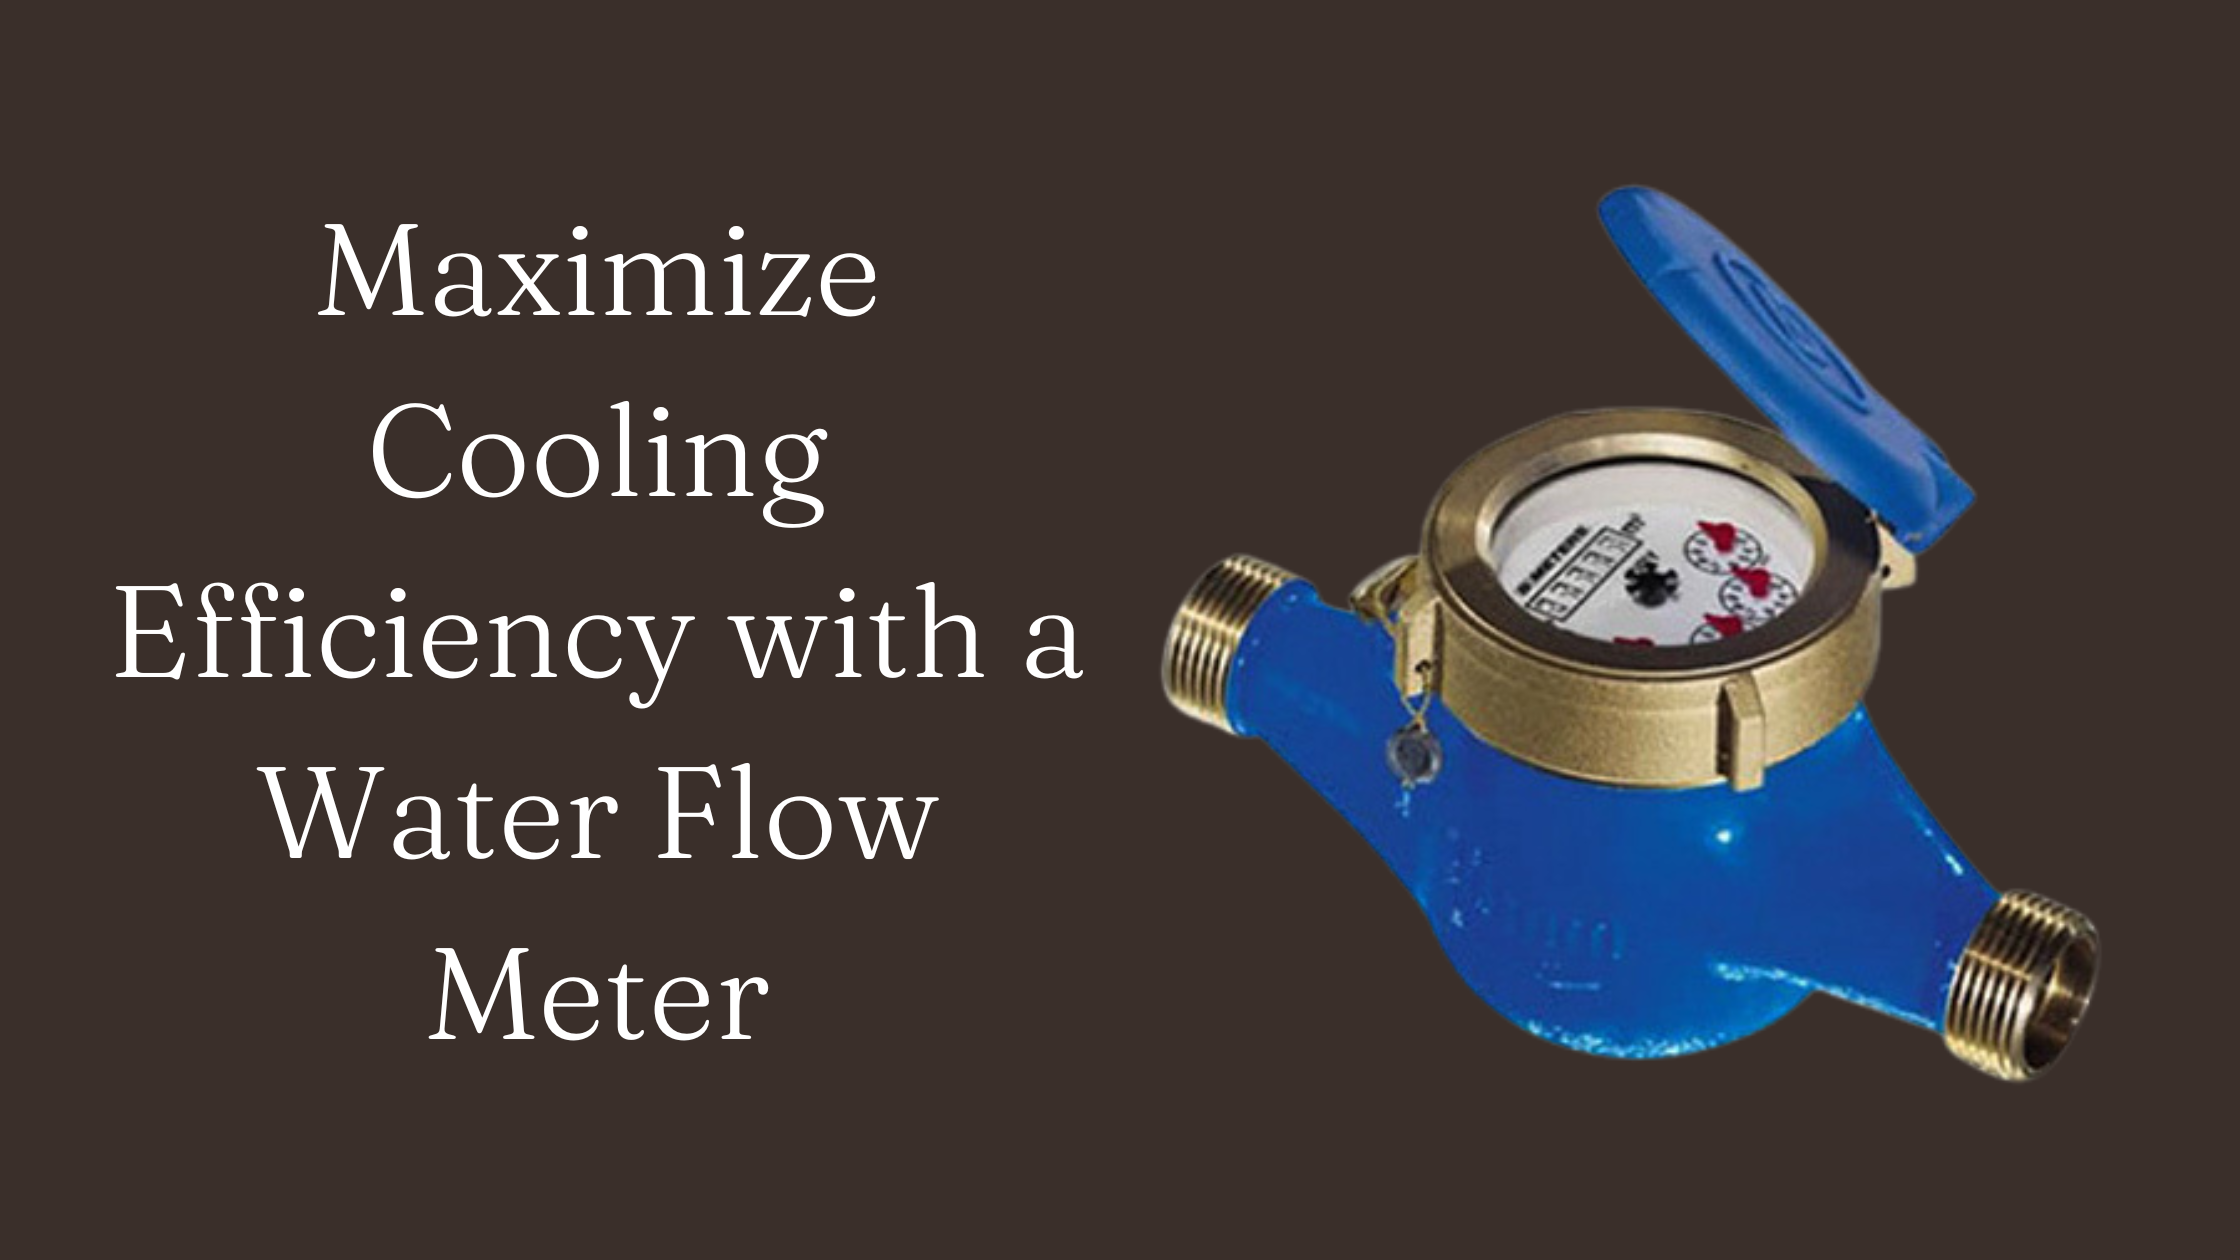 Maximize Cooling Efficiency with a Water Flow Meter | edtechreader